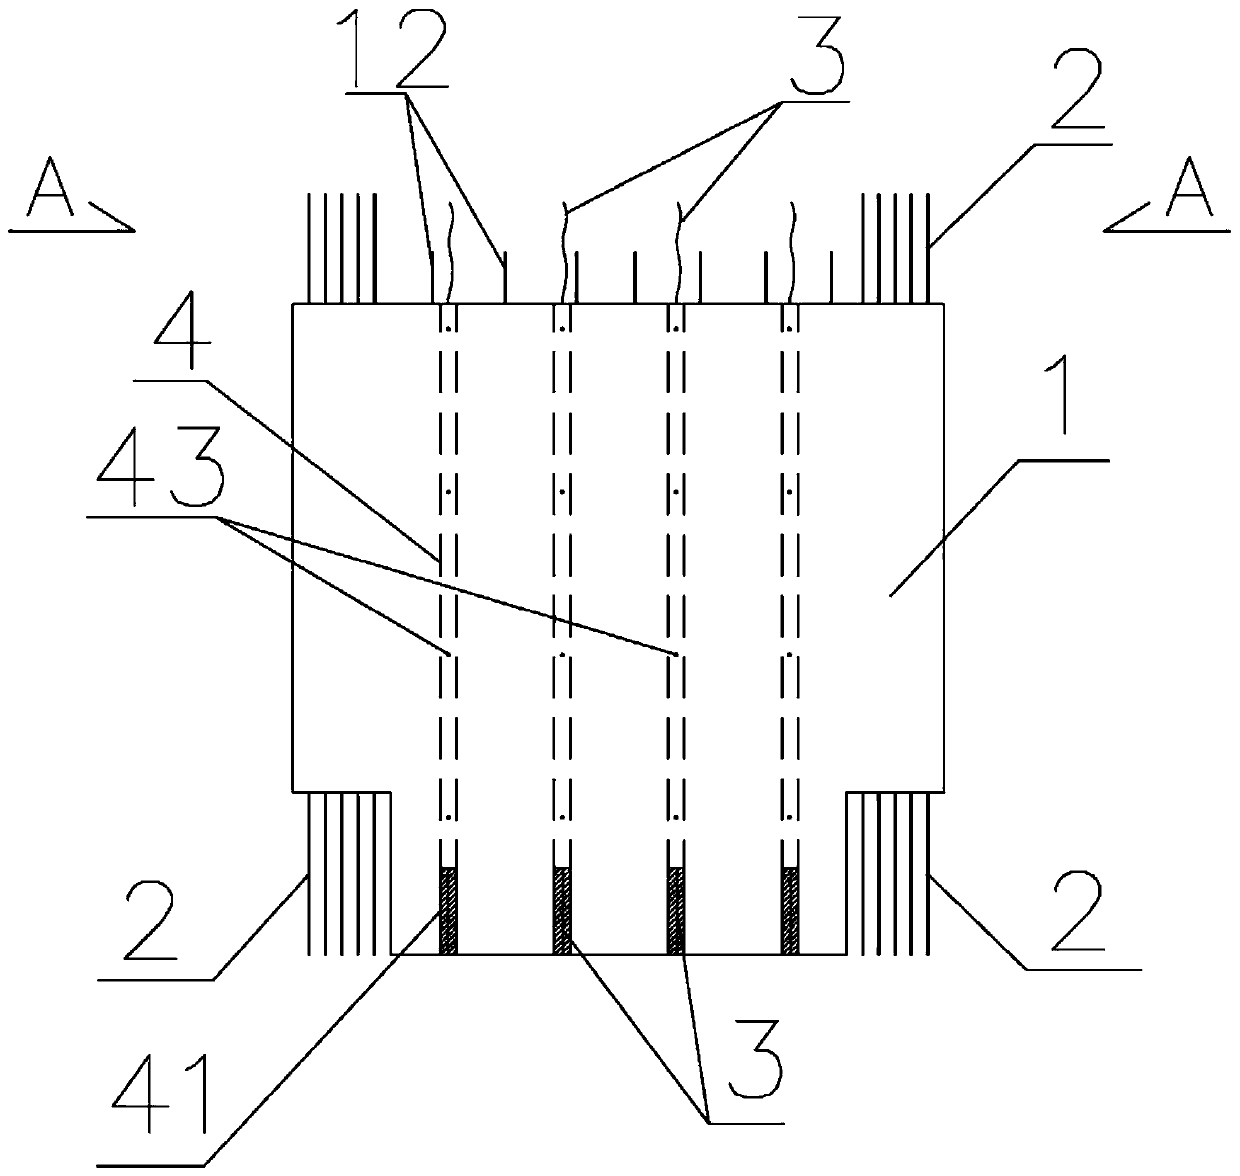 Prefabricated concrete shear wall panel connecting method employing prestressed steel strand for vertical connection